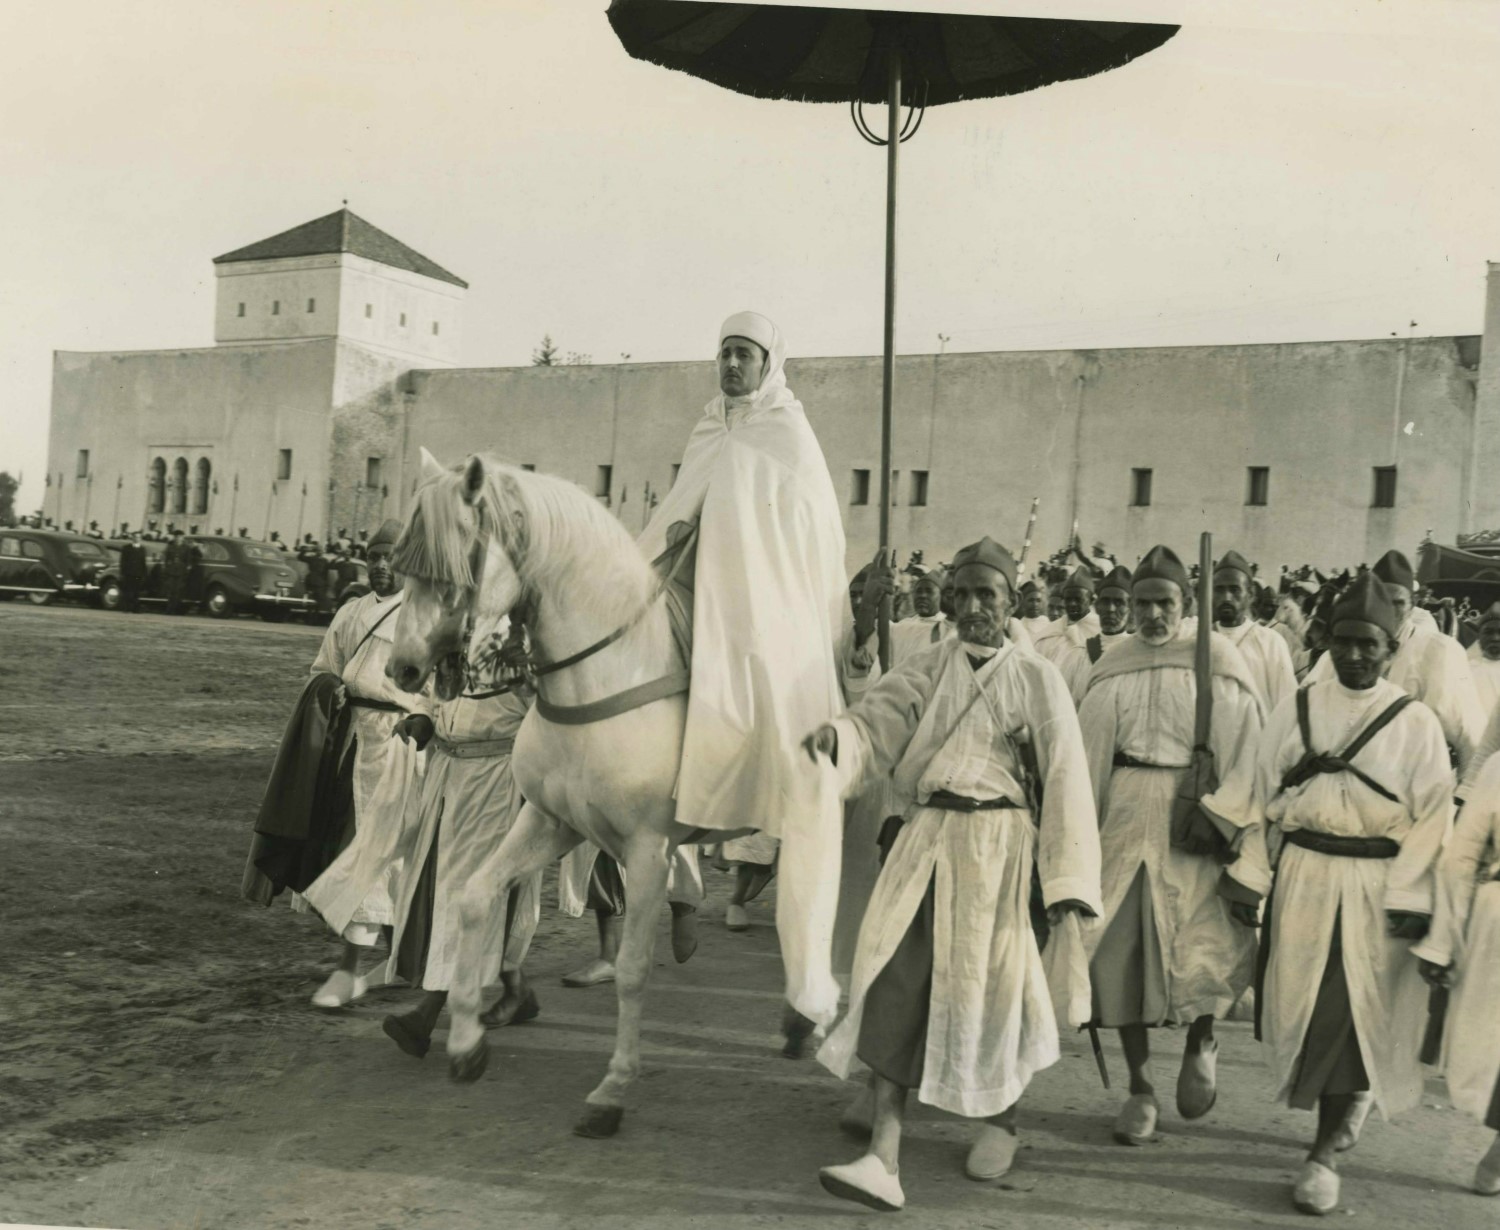 The Sultan of Morocco on his way to attend the French and American celebration in Rabat, Morocco.